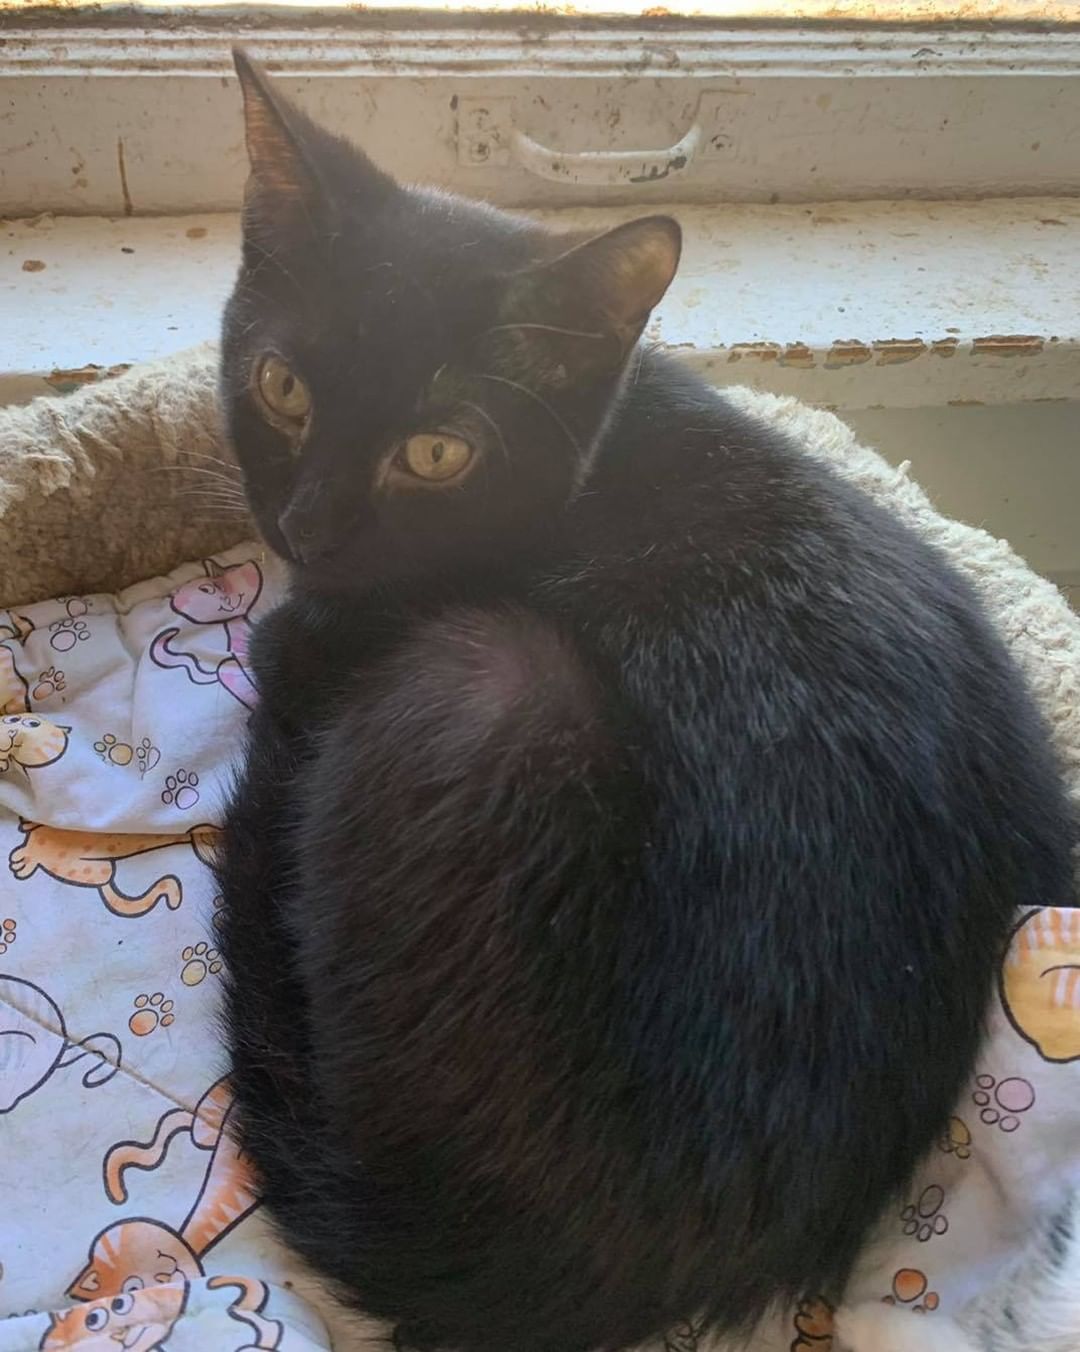 Our ninth black kitty for November is Tahiti! This girl loves to be held and snuggled! She is super sweet and just wants to give you all her love 💕 Tahiti is 6 months old, spayed, FIV/FELV negative and up to date on vaccines. To put in an application click on the link below. 

https://www.sbanimalrescue.org/adopt